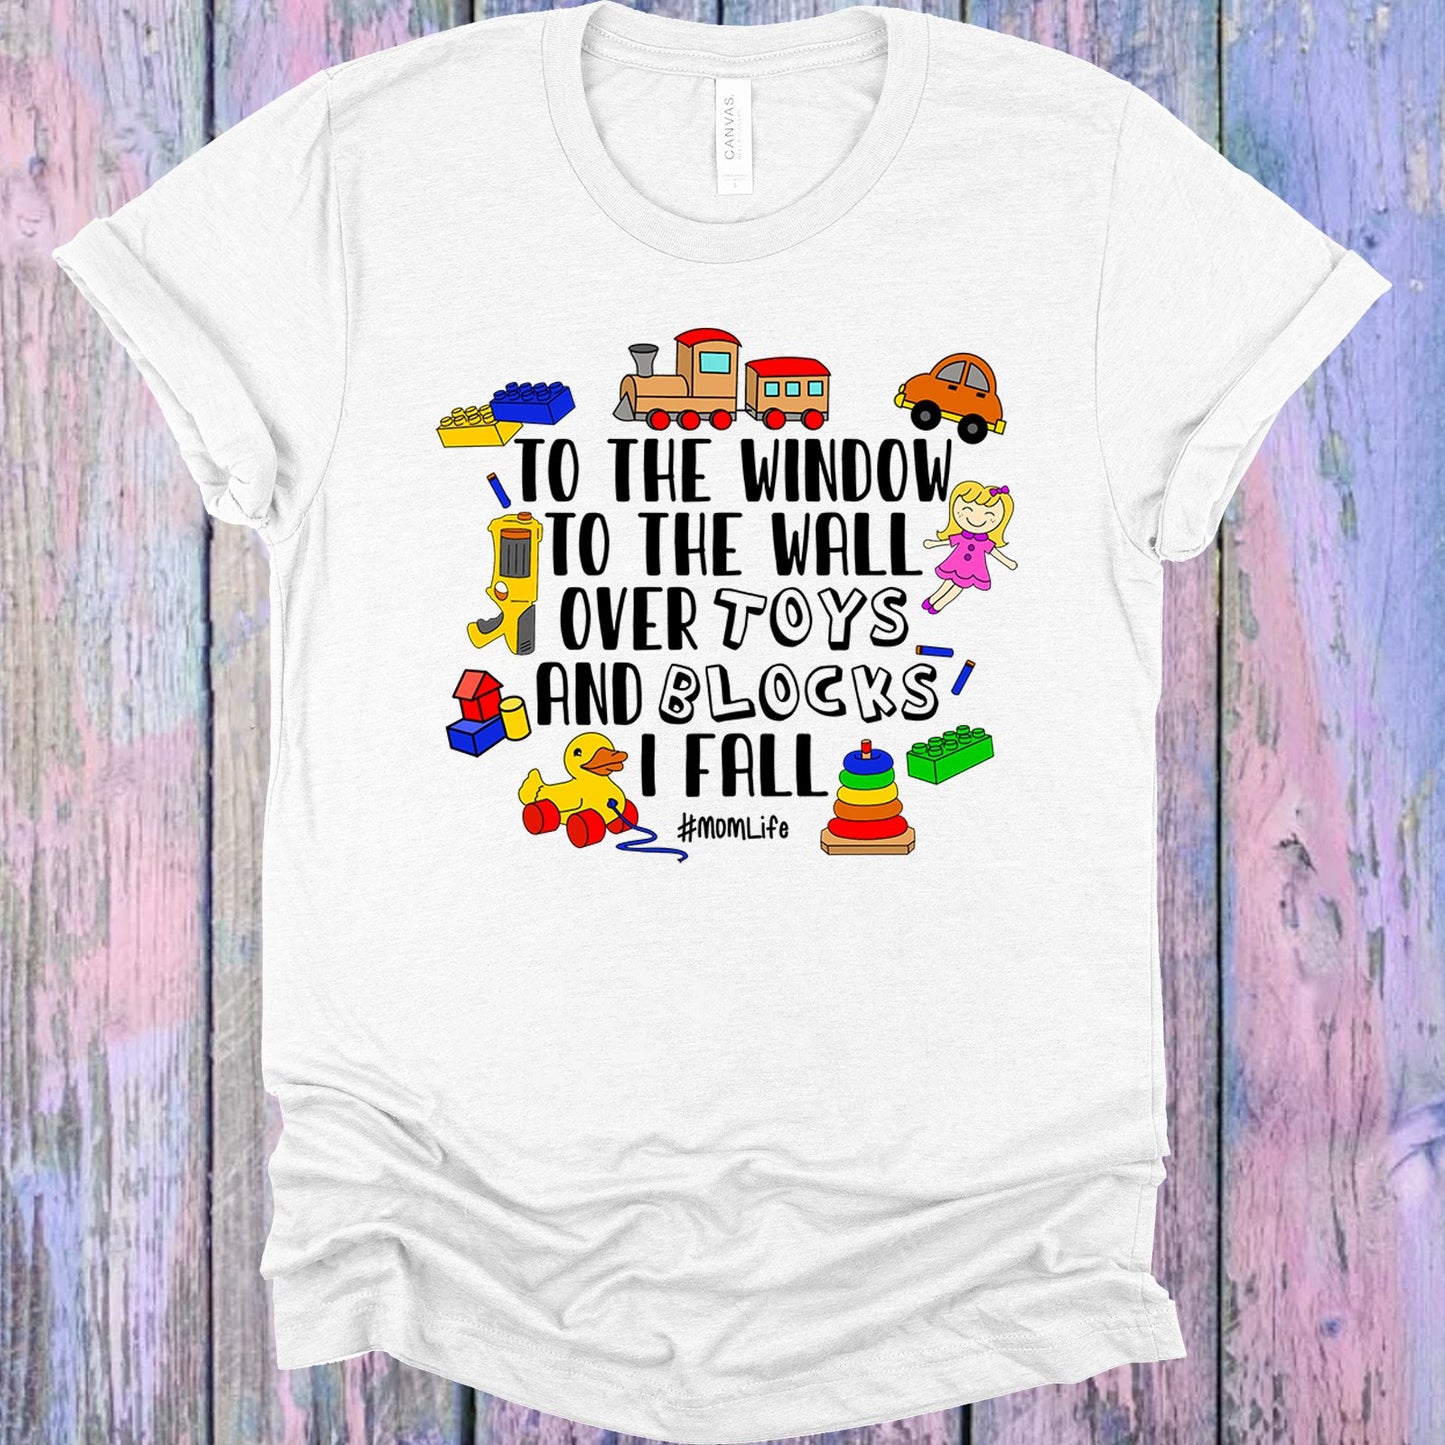 Over Toys And Blocks I Fall Graphic Tee Graphic Tee